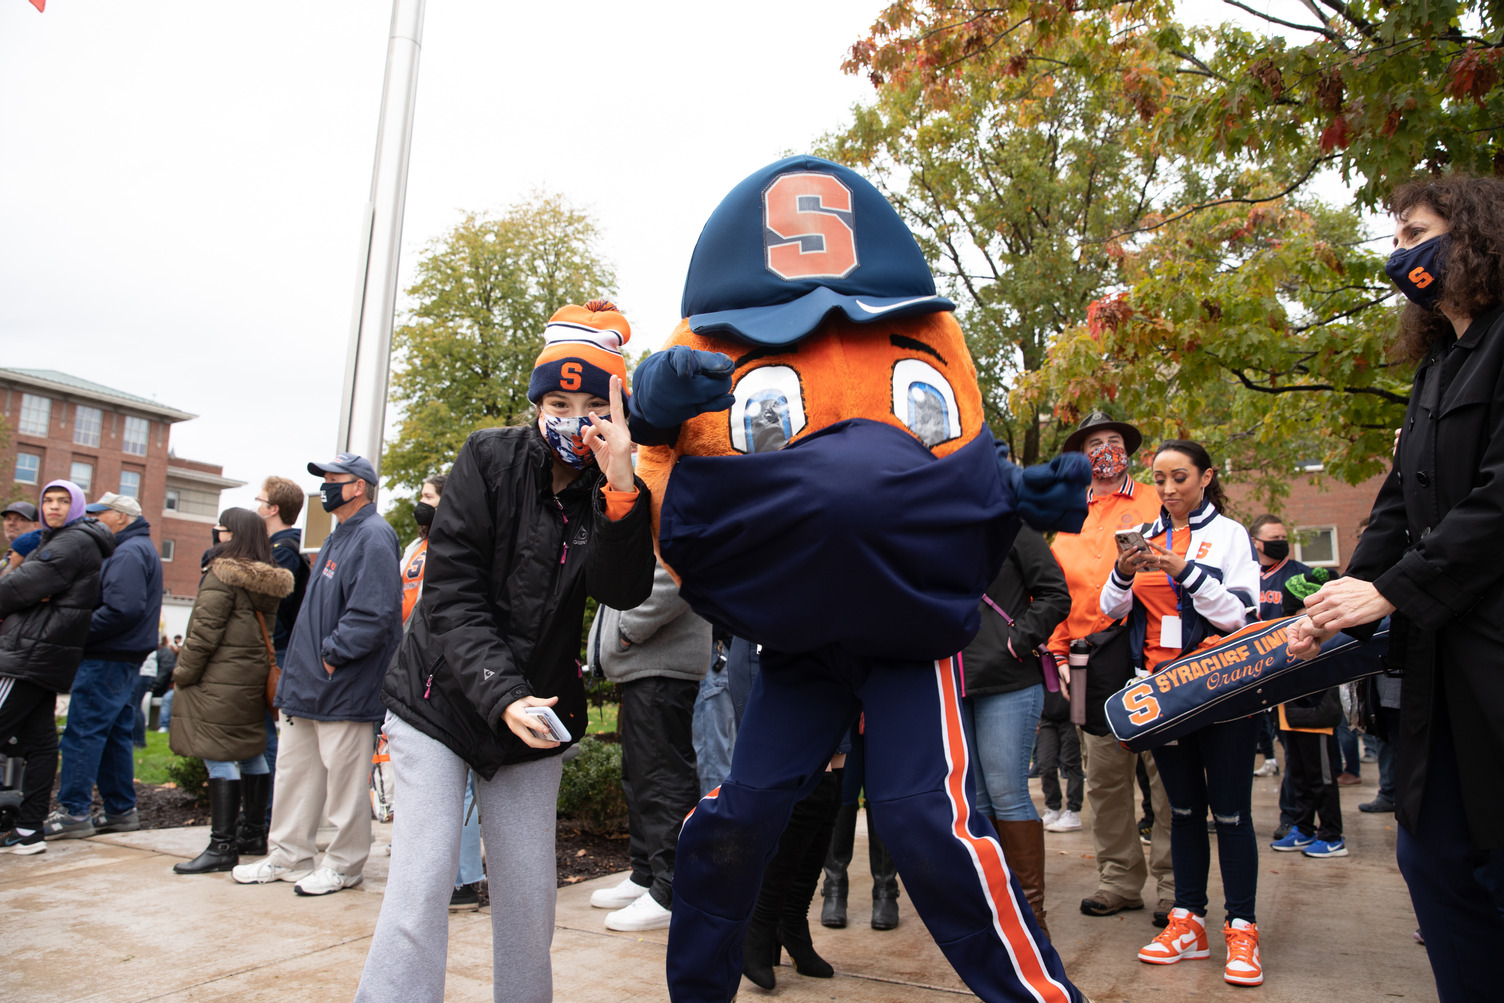 Otto poses with a young fan at the 2021 Orange Central tailgate celebration